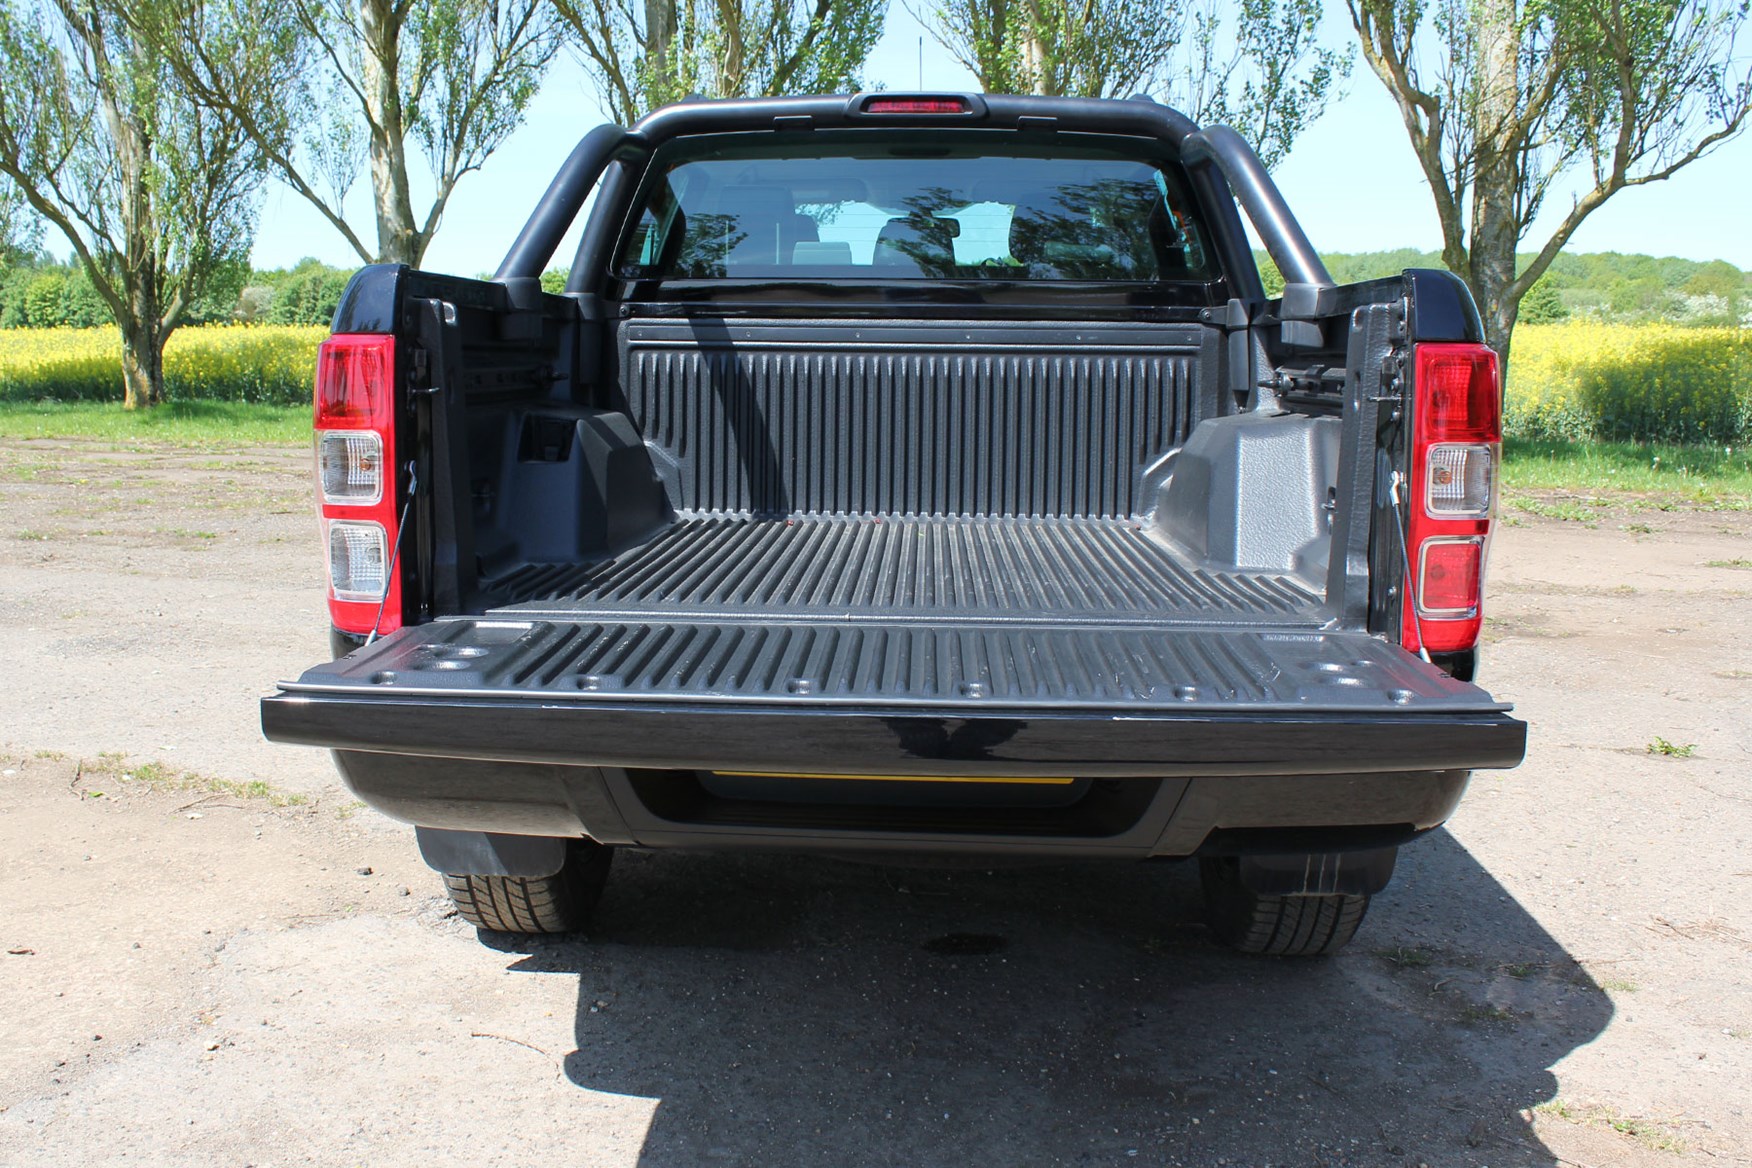 Ford Ranger Black Edition review - load bed area